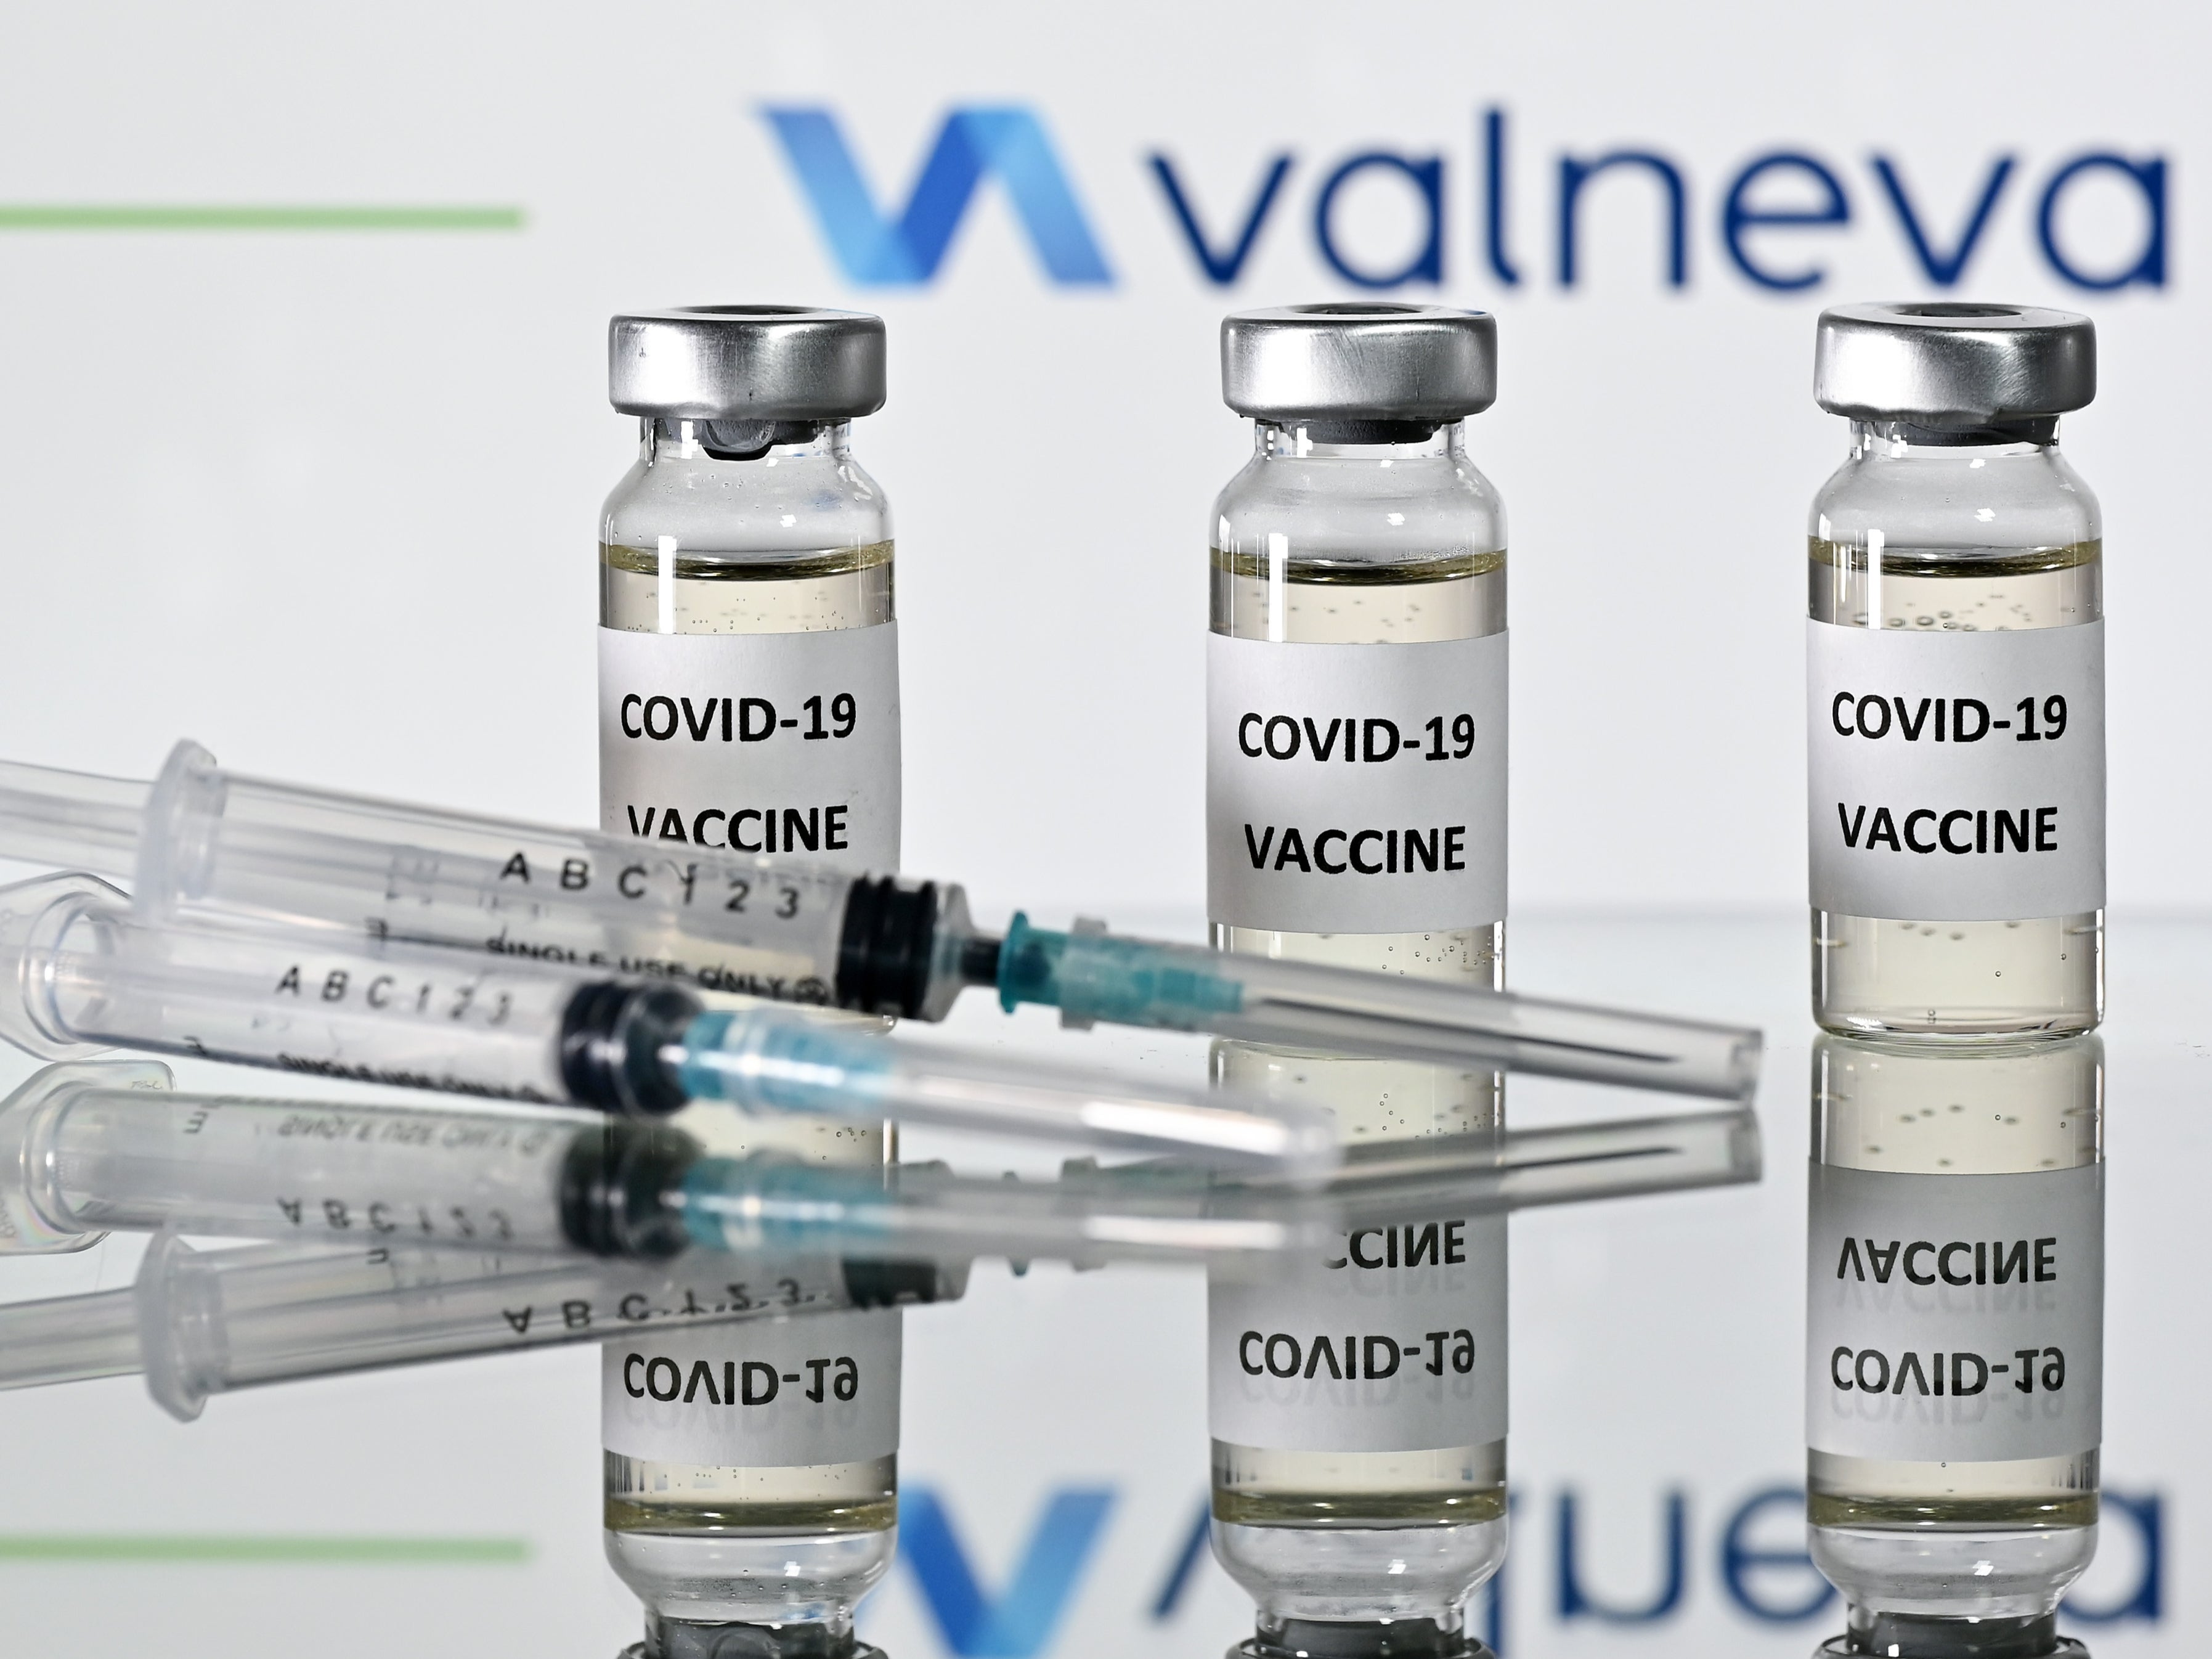 A jab developed by Valneva has become the sixth Covid vaccine to gain regulatory approval in the UK